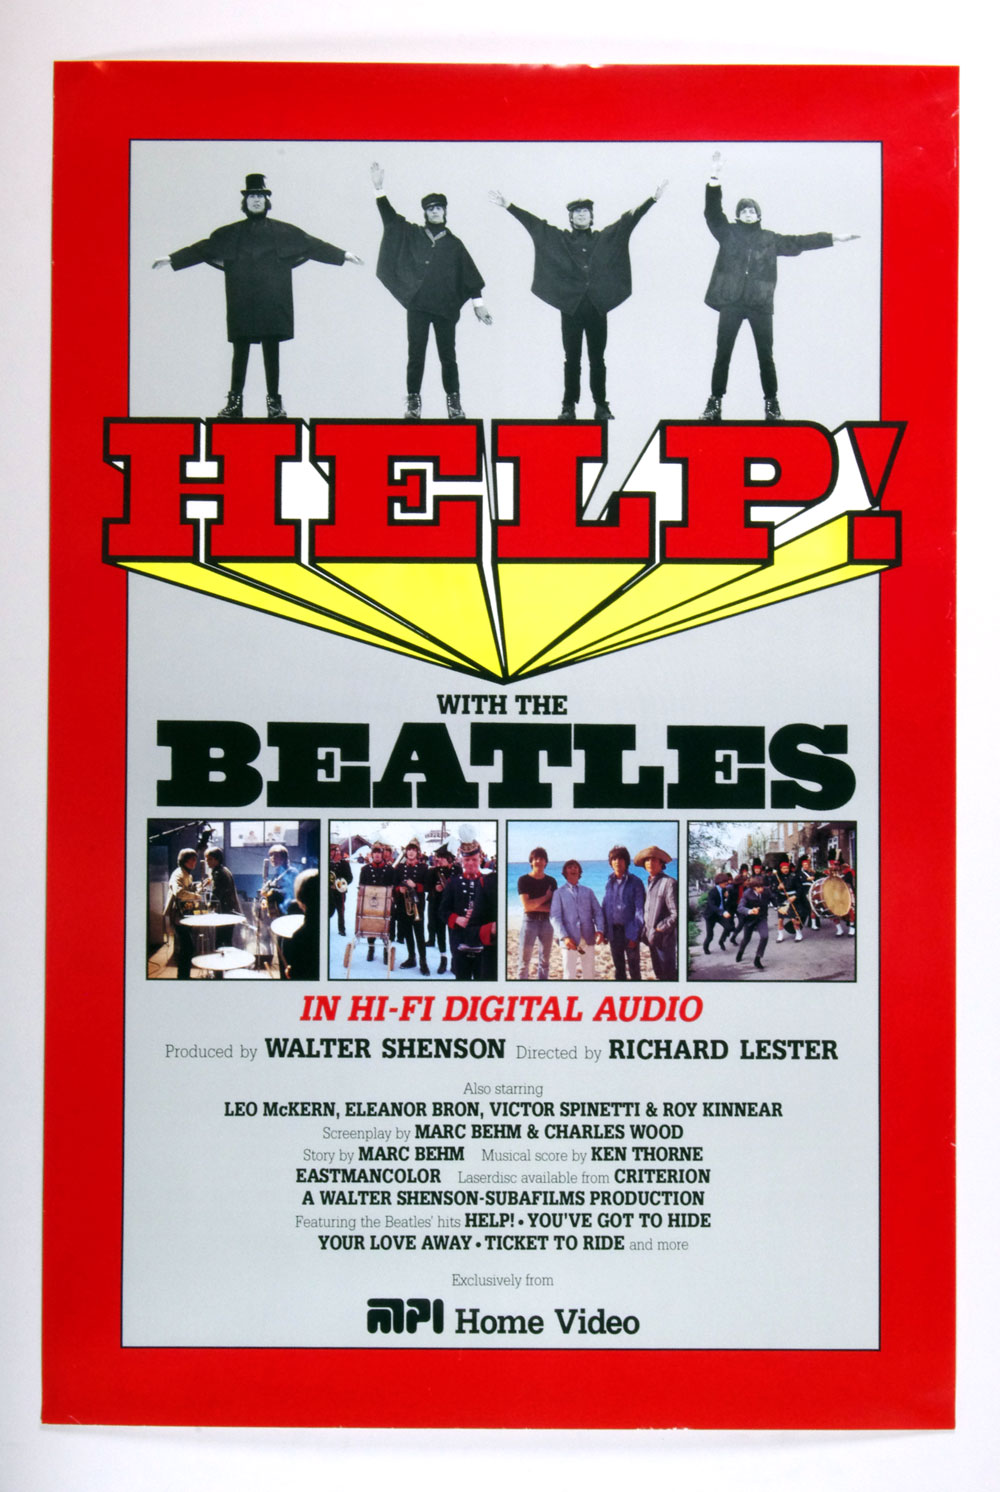 The Beatles Poster HELP! Movie Home Video Release Promo 24 x 36